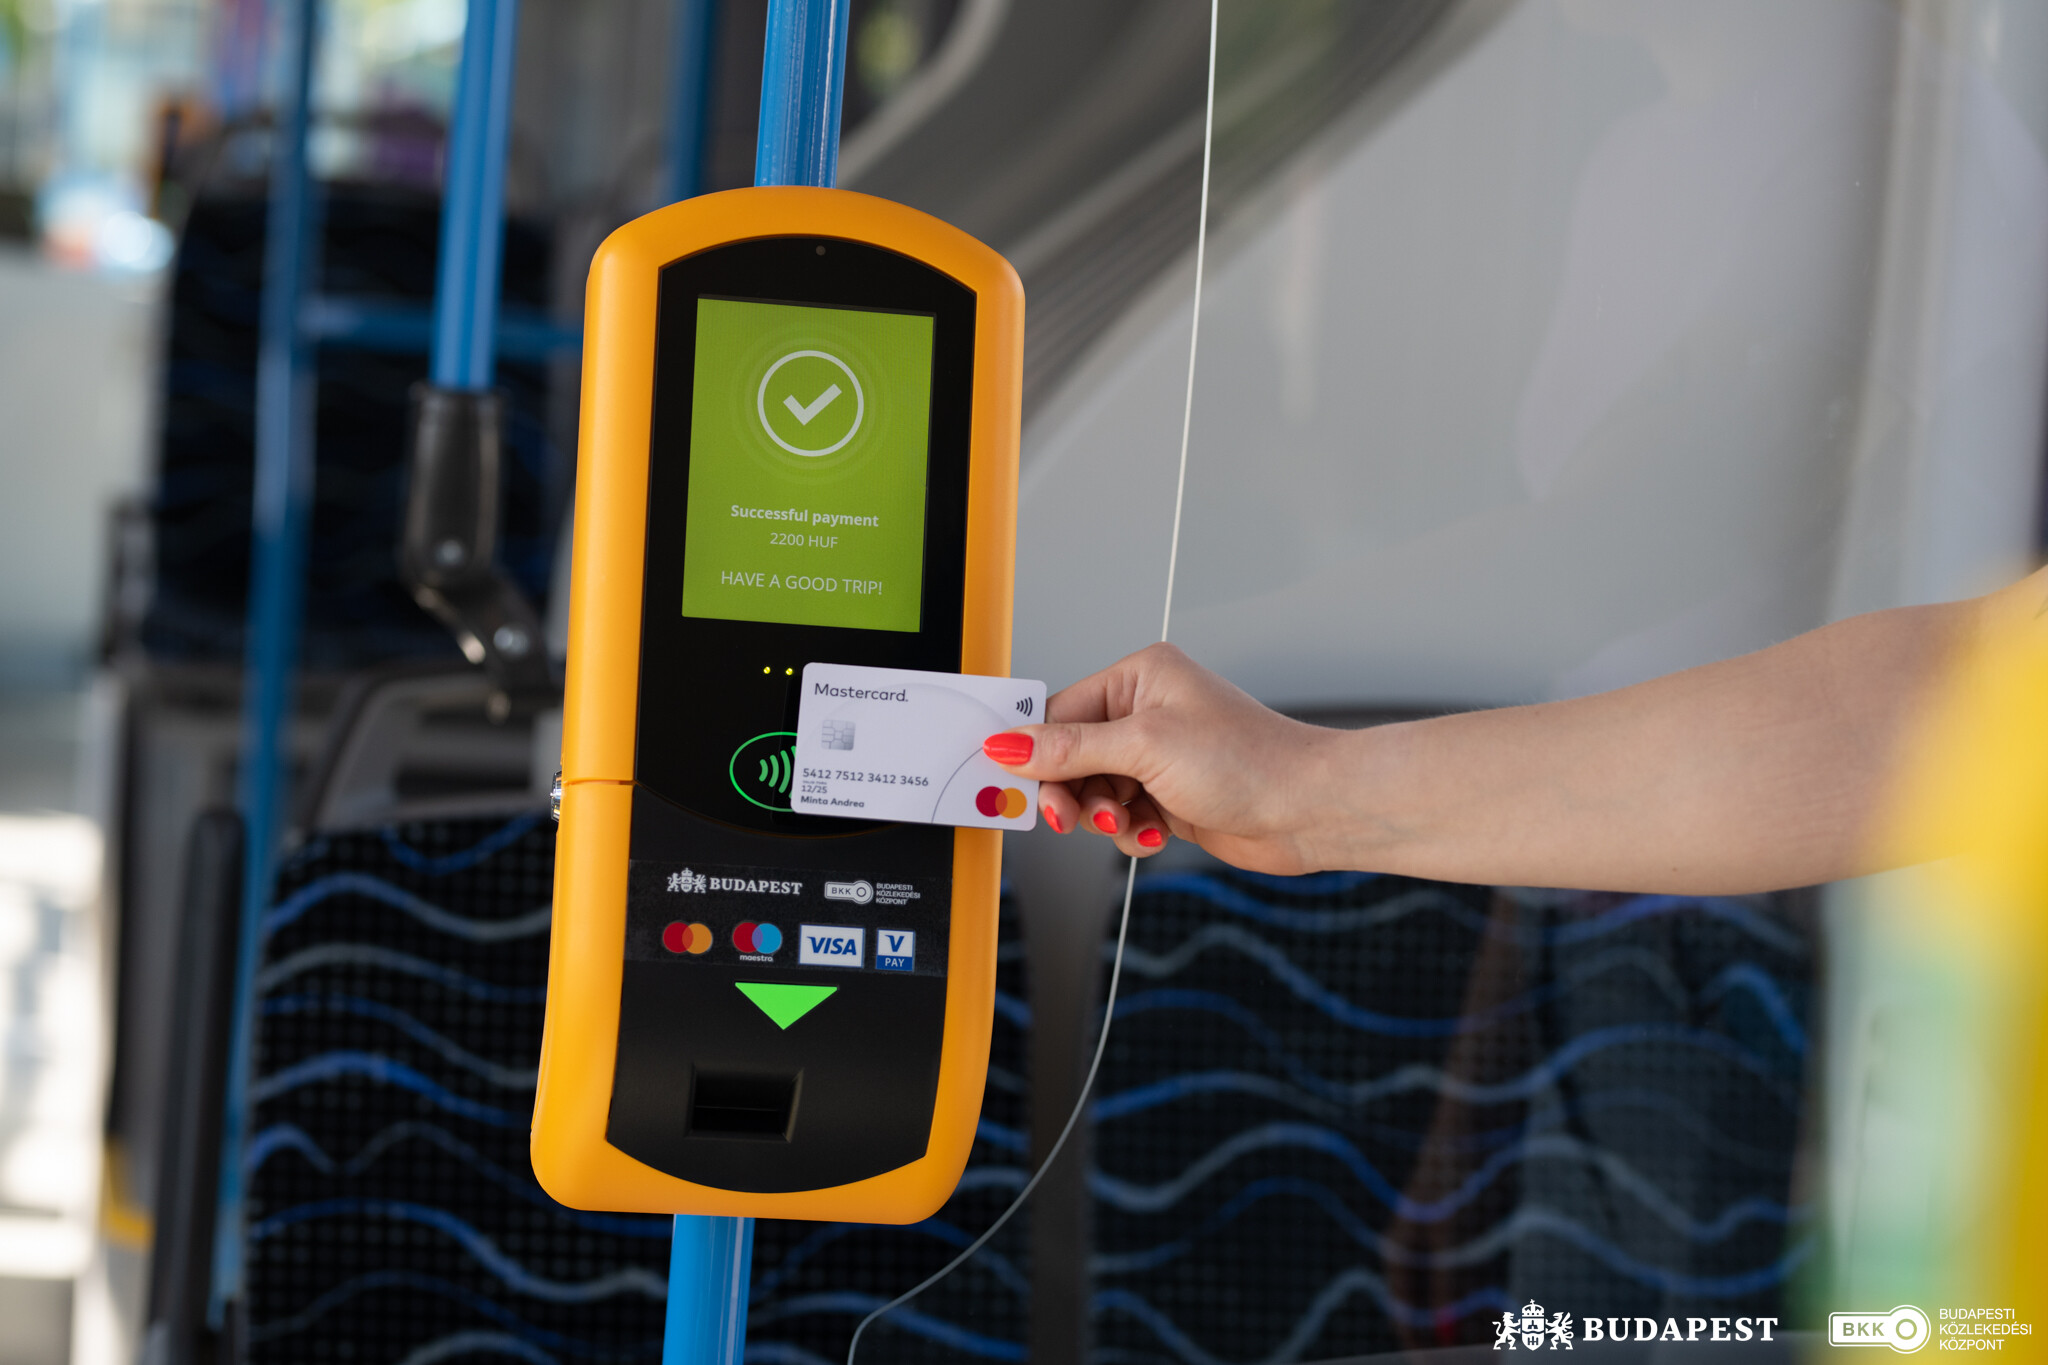 Budapest Pay&GO device with successful purchase